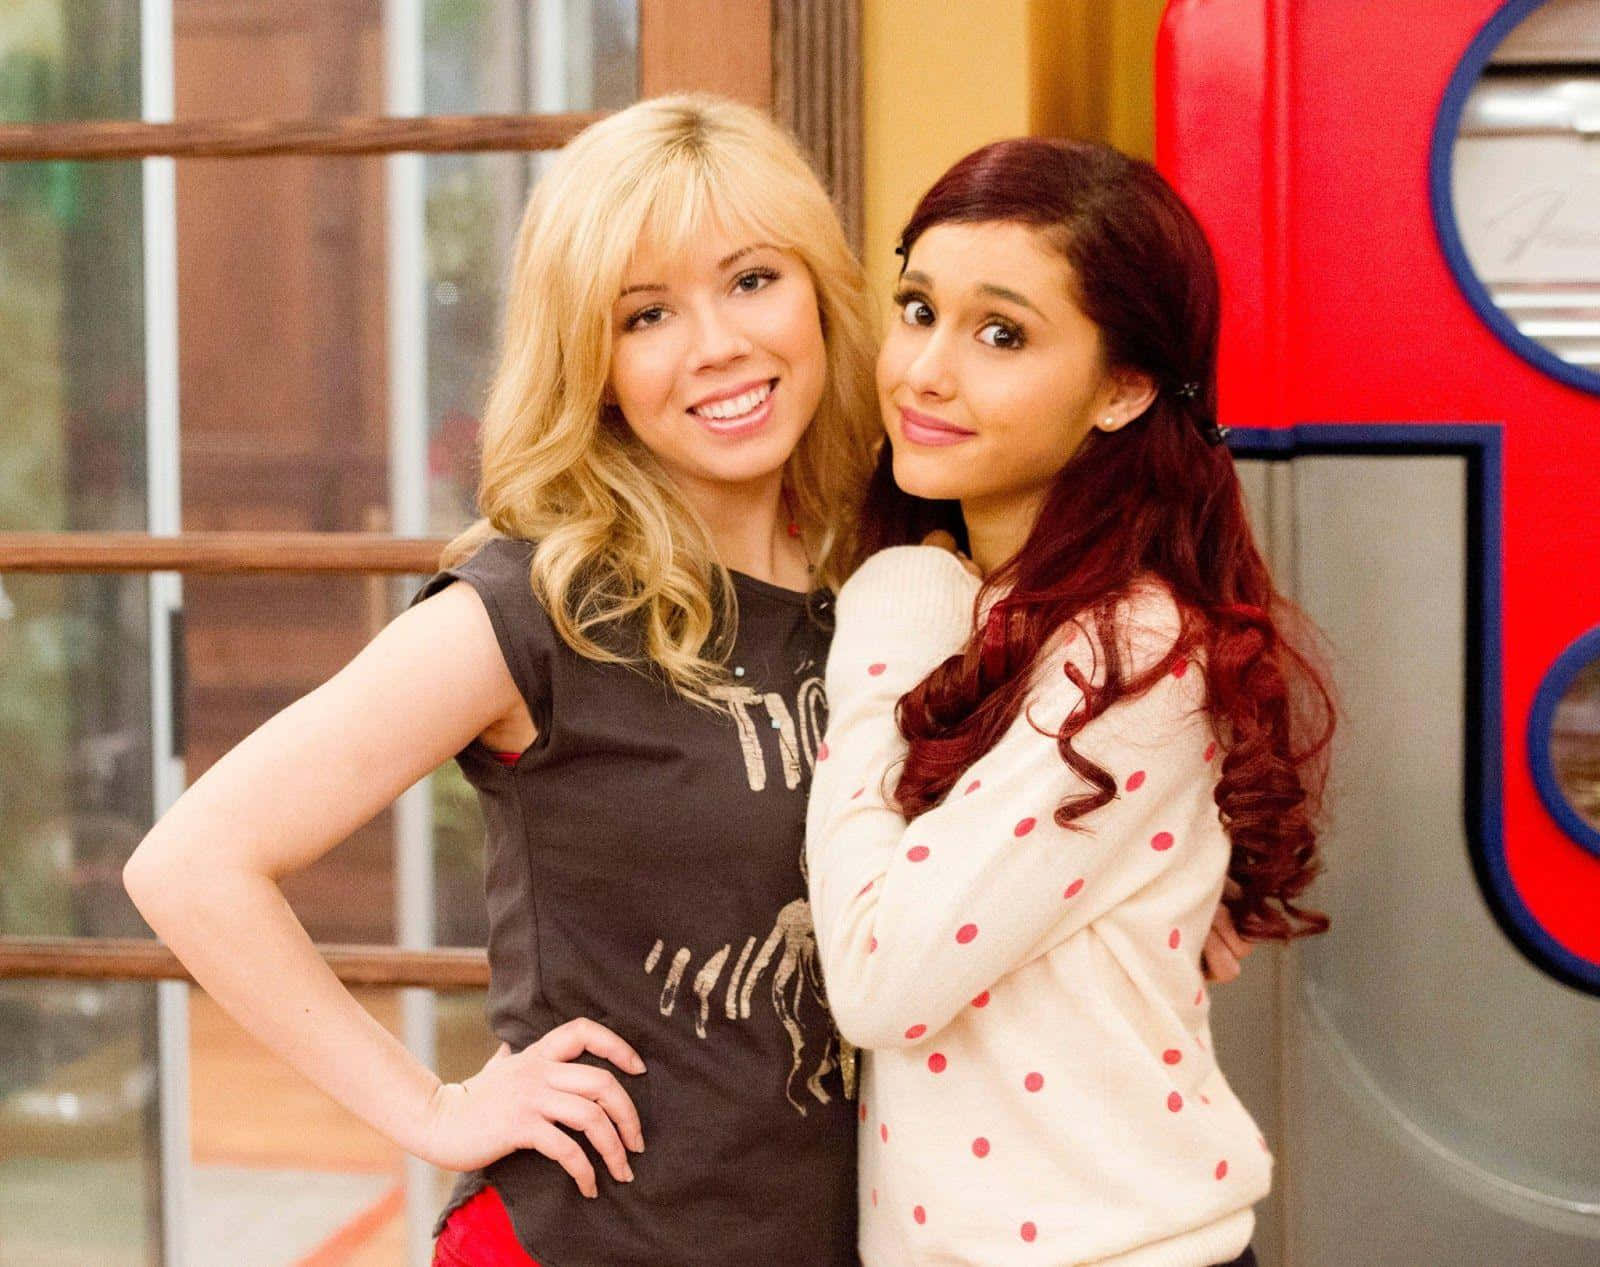 Sam and Cat embracing as best friends Wallpaper